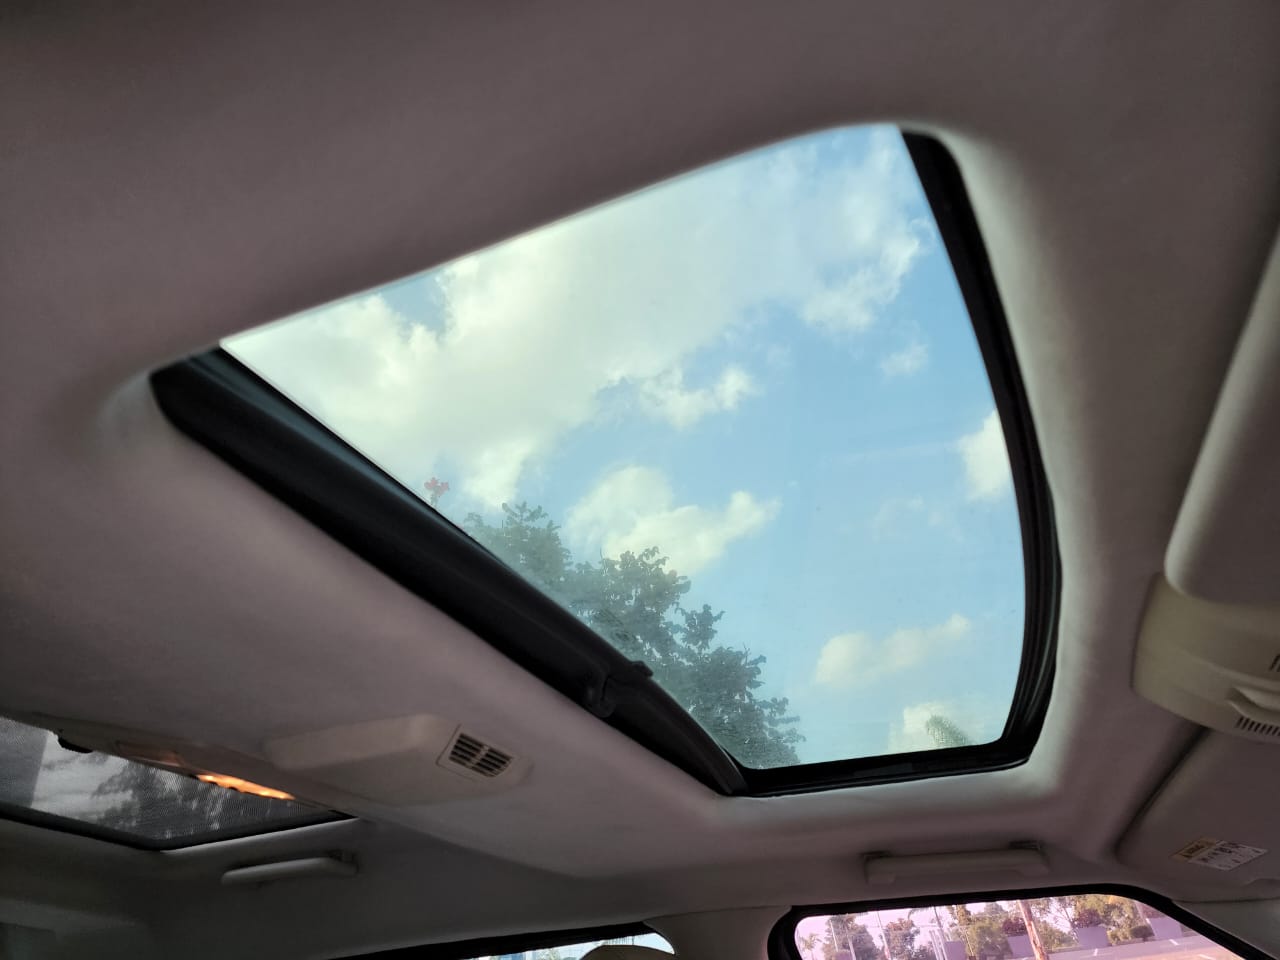 DISCOVERY 4 TDV6 triple Sunroof You Pay 20% Deposit